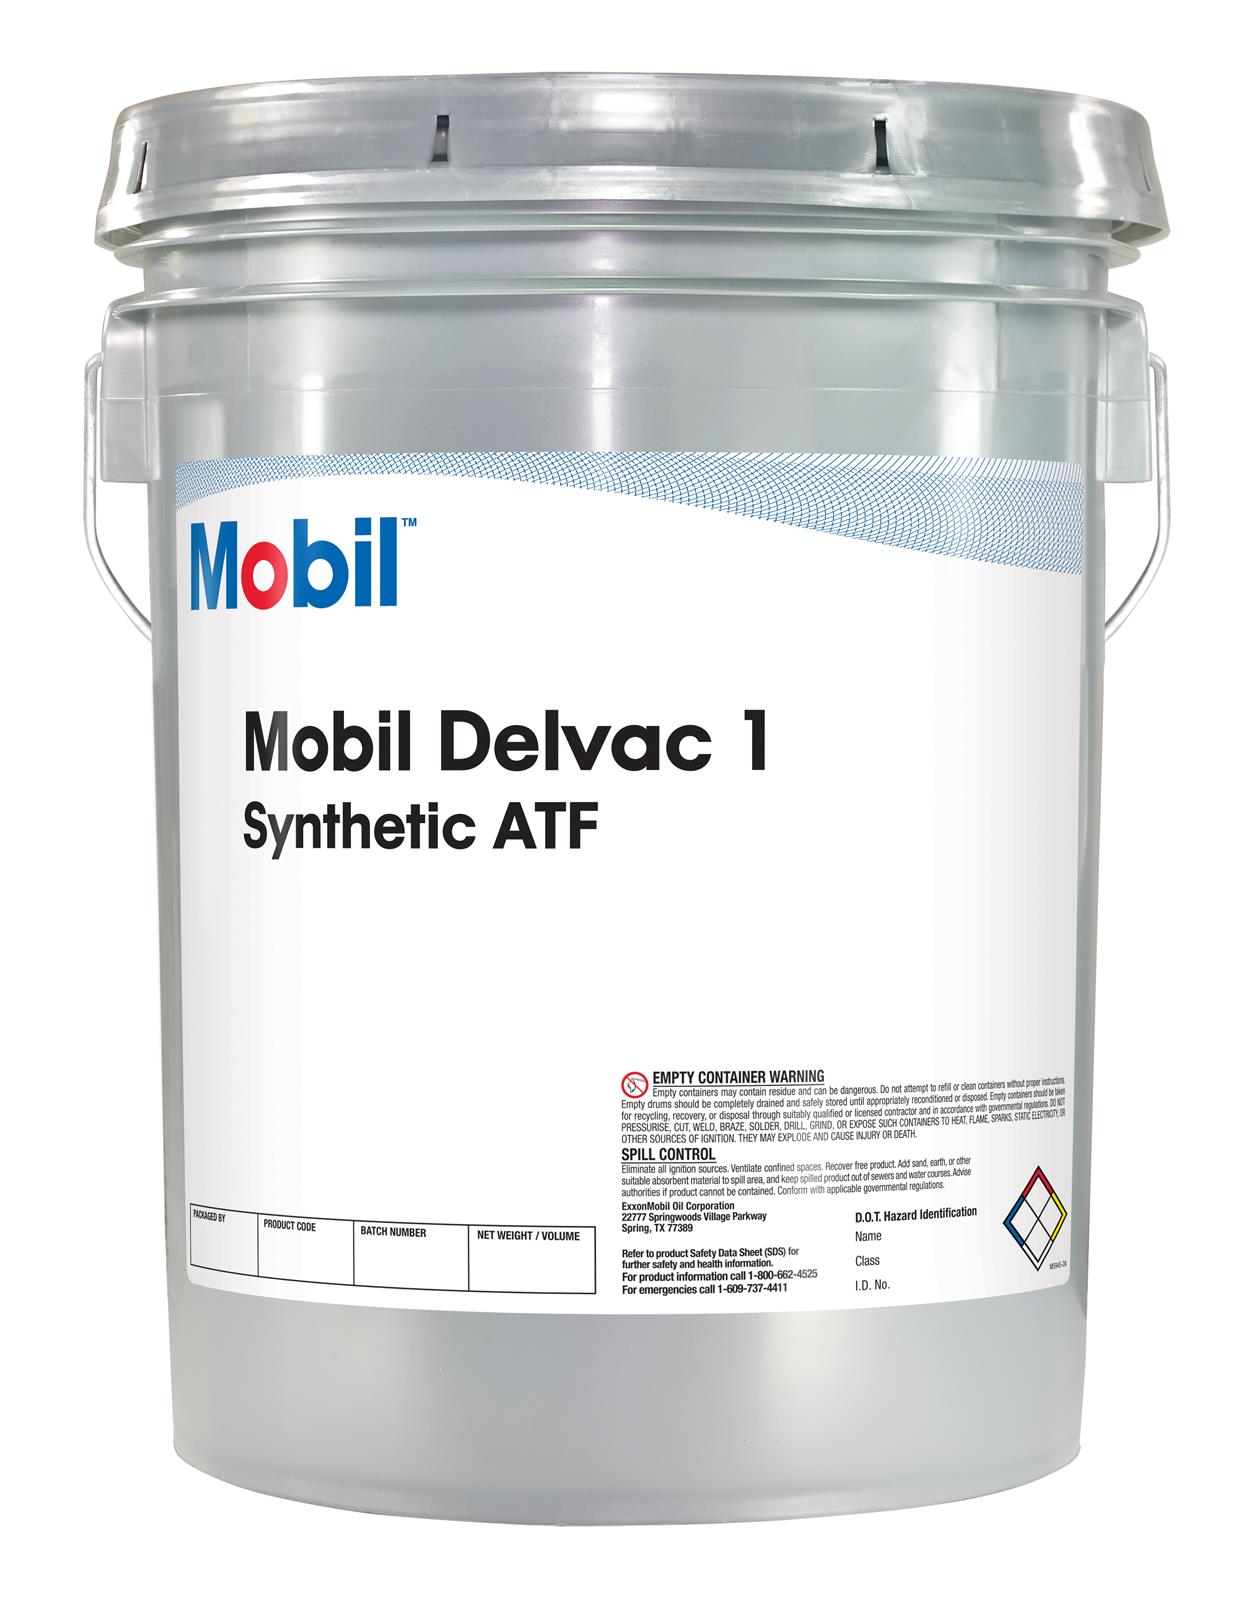 is Mobil 1™ Synthetic LV ATF HP compatible with dexron VI ATF